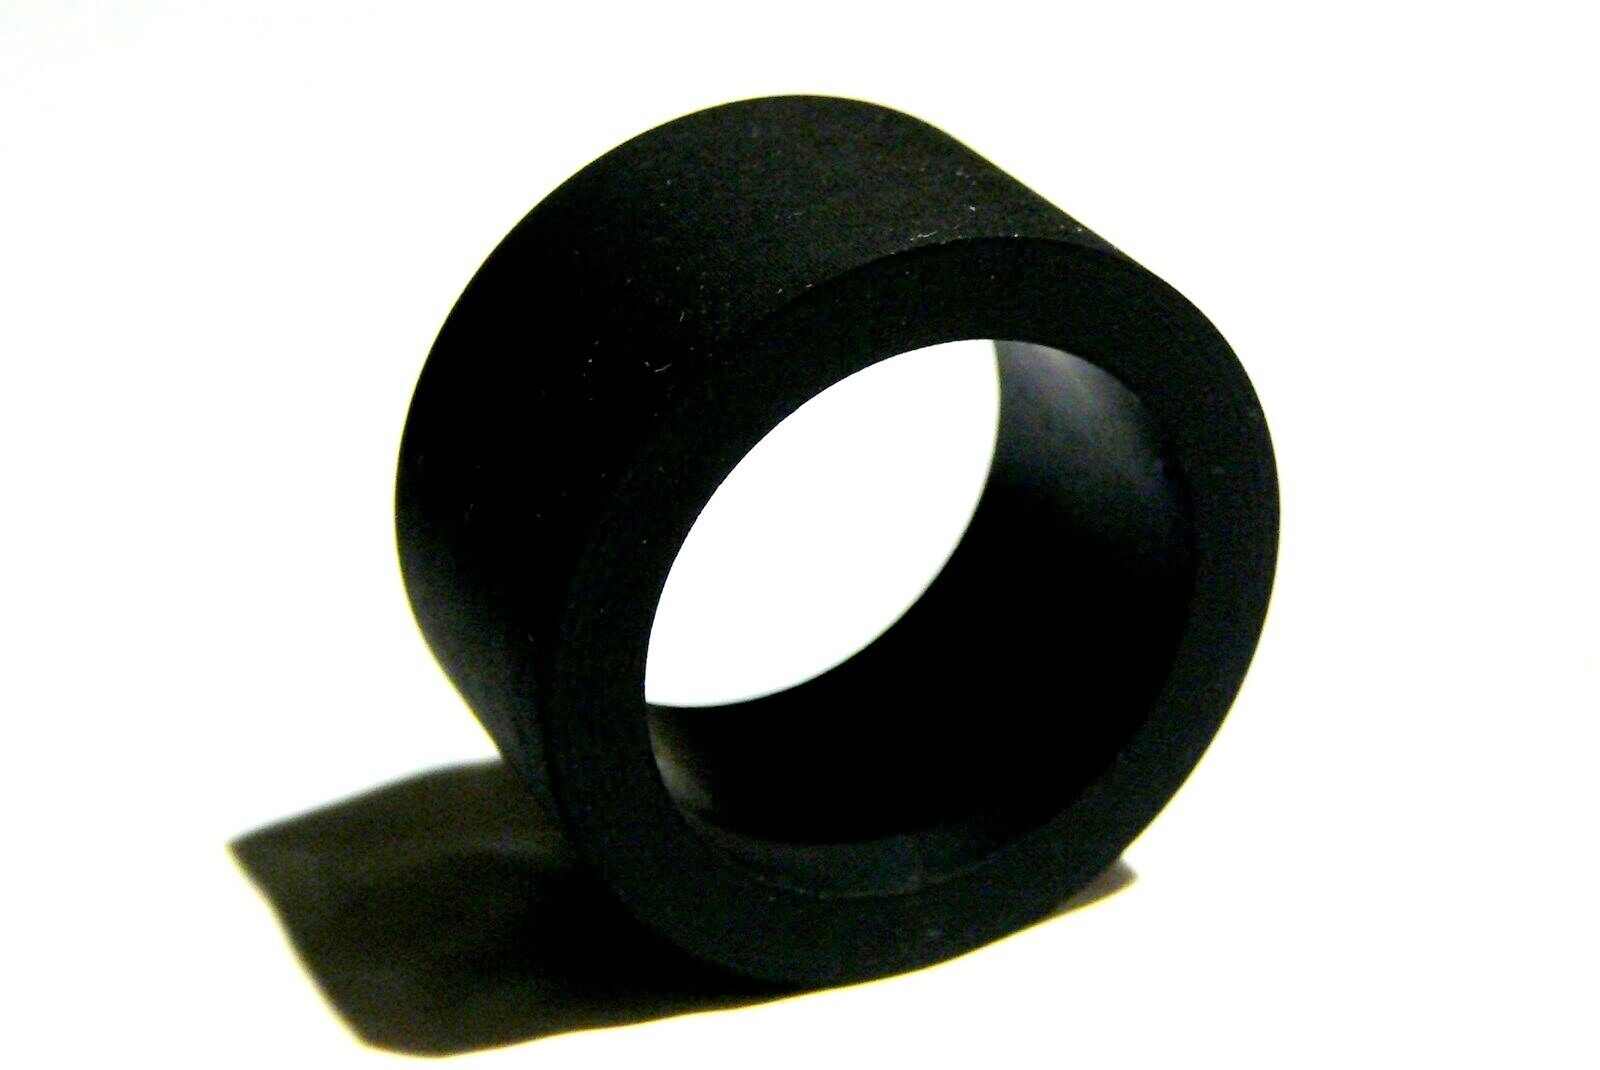 NEW TIRE FOR TEAC TASCAM PINCH ROLLER # 5014175100 FITS MODELS LISTED BELOW 